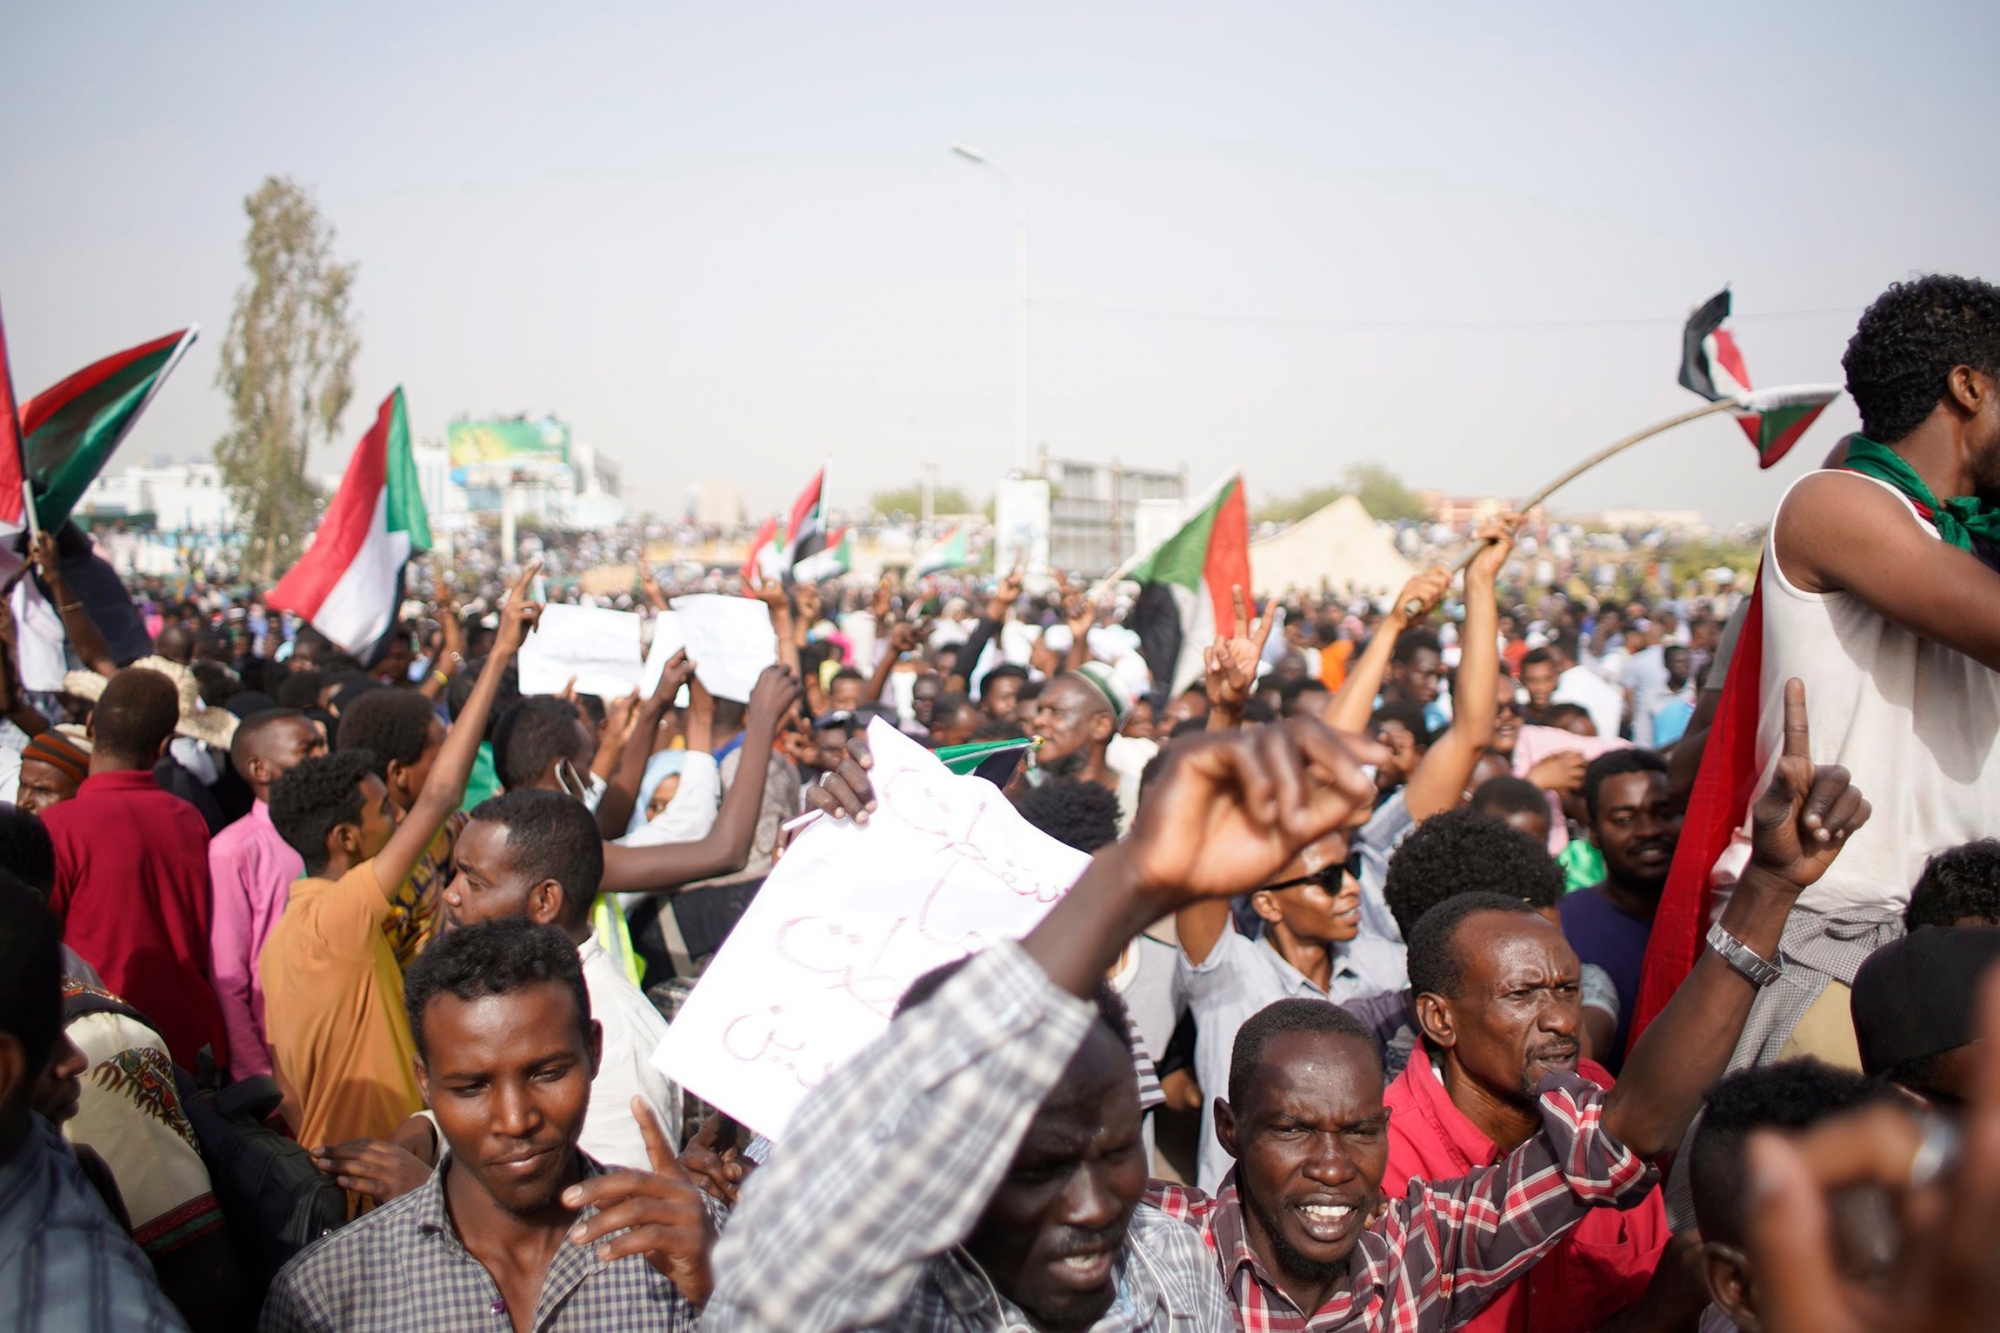 epa07498306 Demonstrators take part in a protest demanding the departure of Sudanese President Omar al-Bashir as they wait for an announcement outside the Sudanese Army headquarters in Khartoum, Sudan, 11 April 2019. According to media reports, Omar al-Bashir was expected to step down from the presidency following a four month uprising, held by citizens calling for his resignation.  EPA/STR SUDAN PROTEST